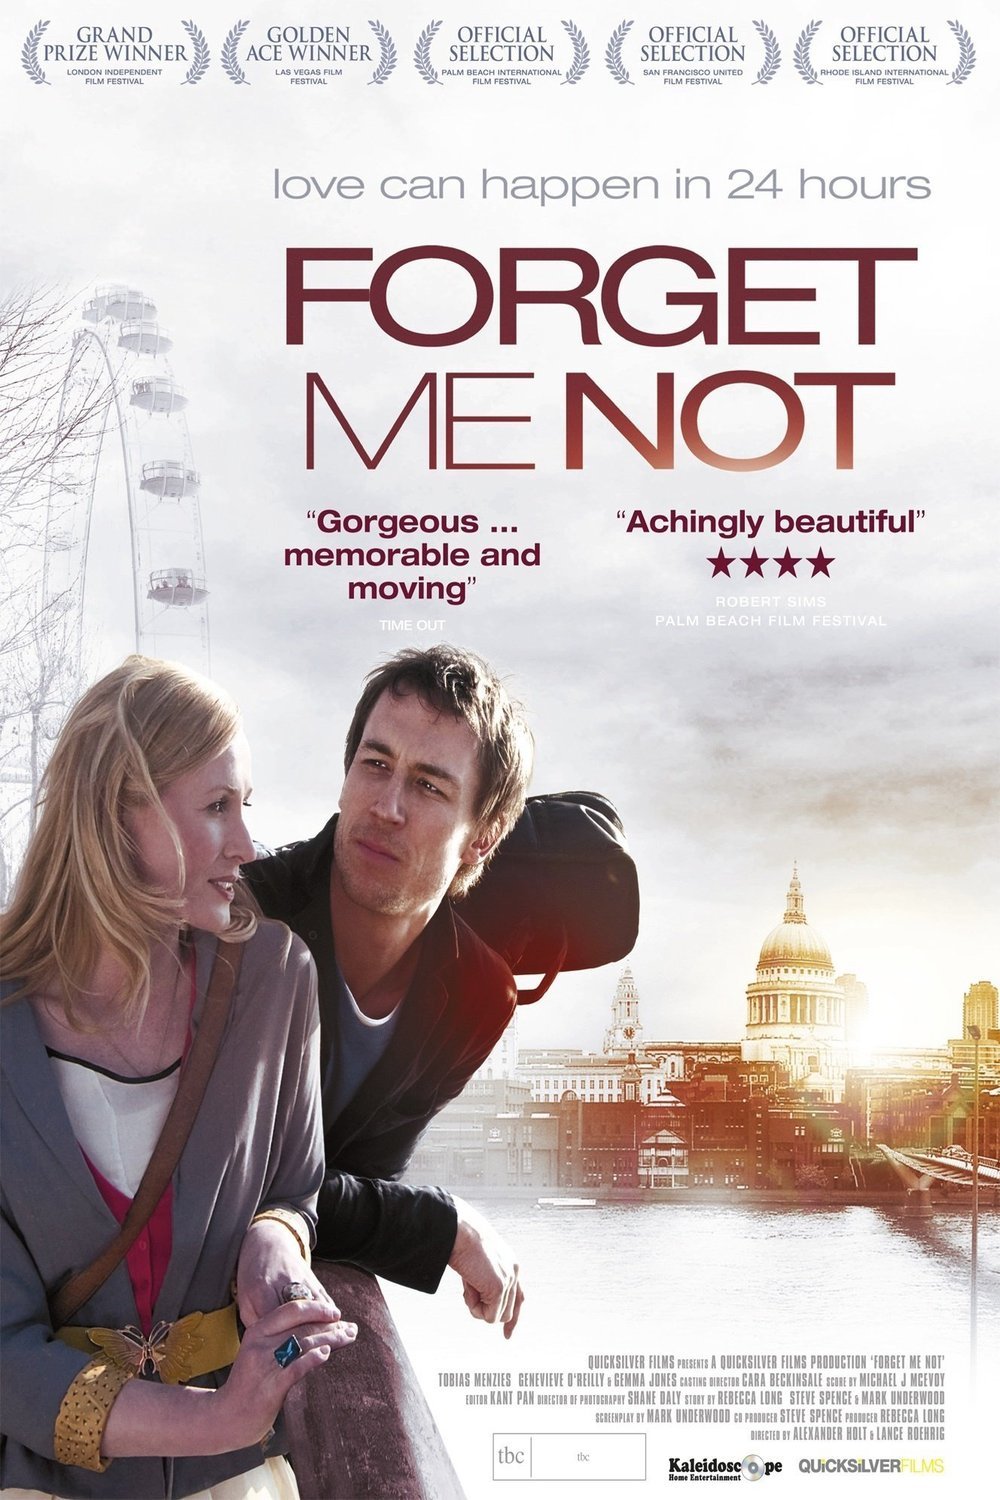 Poster of the movie Forget Me Not